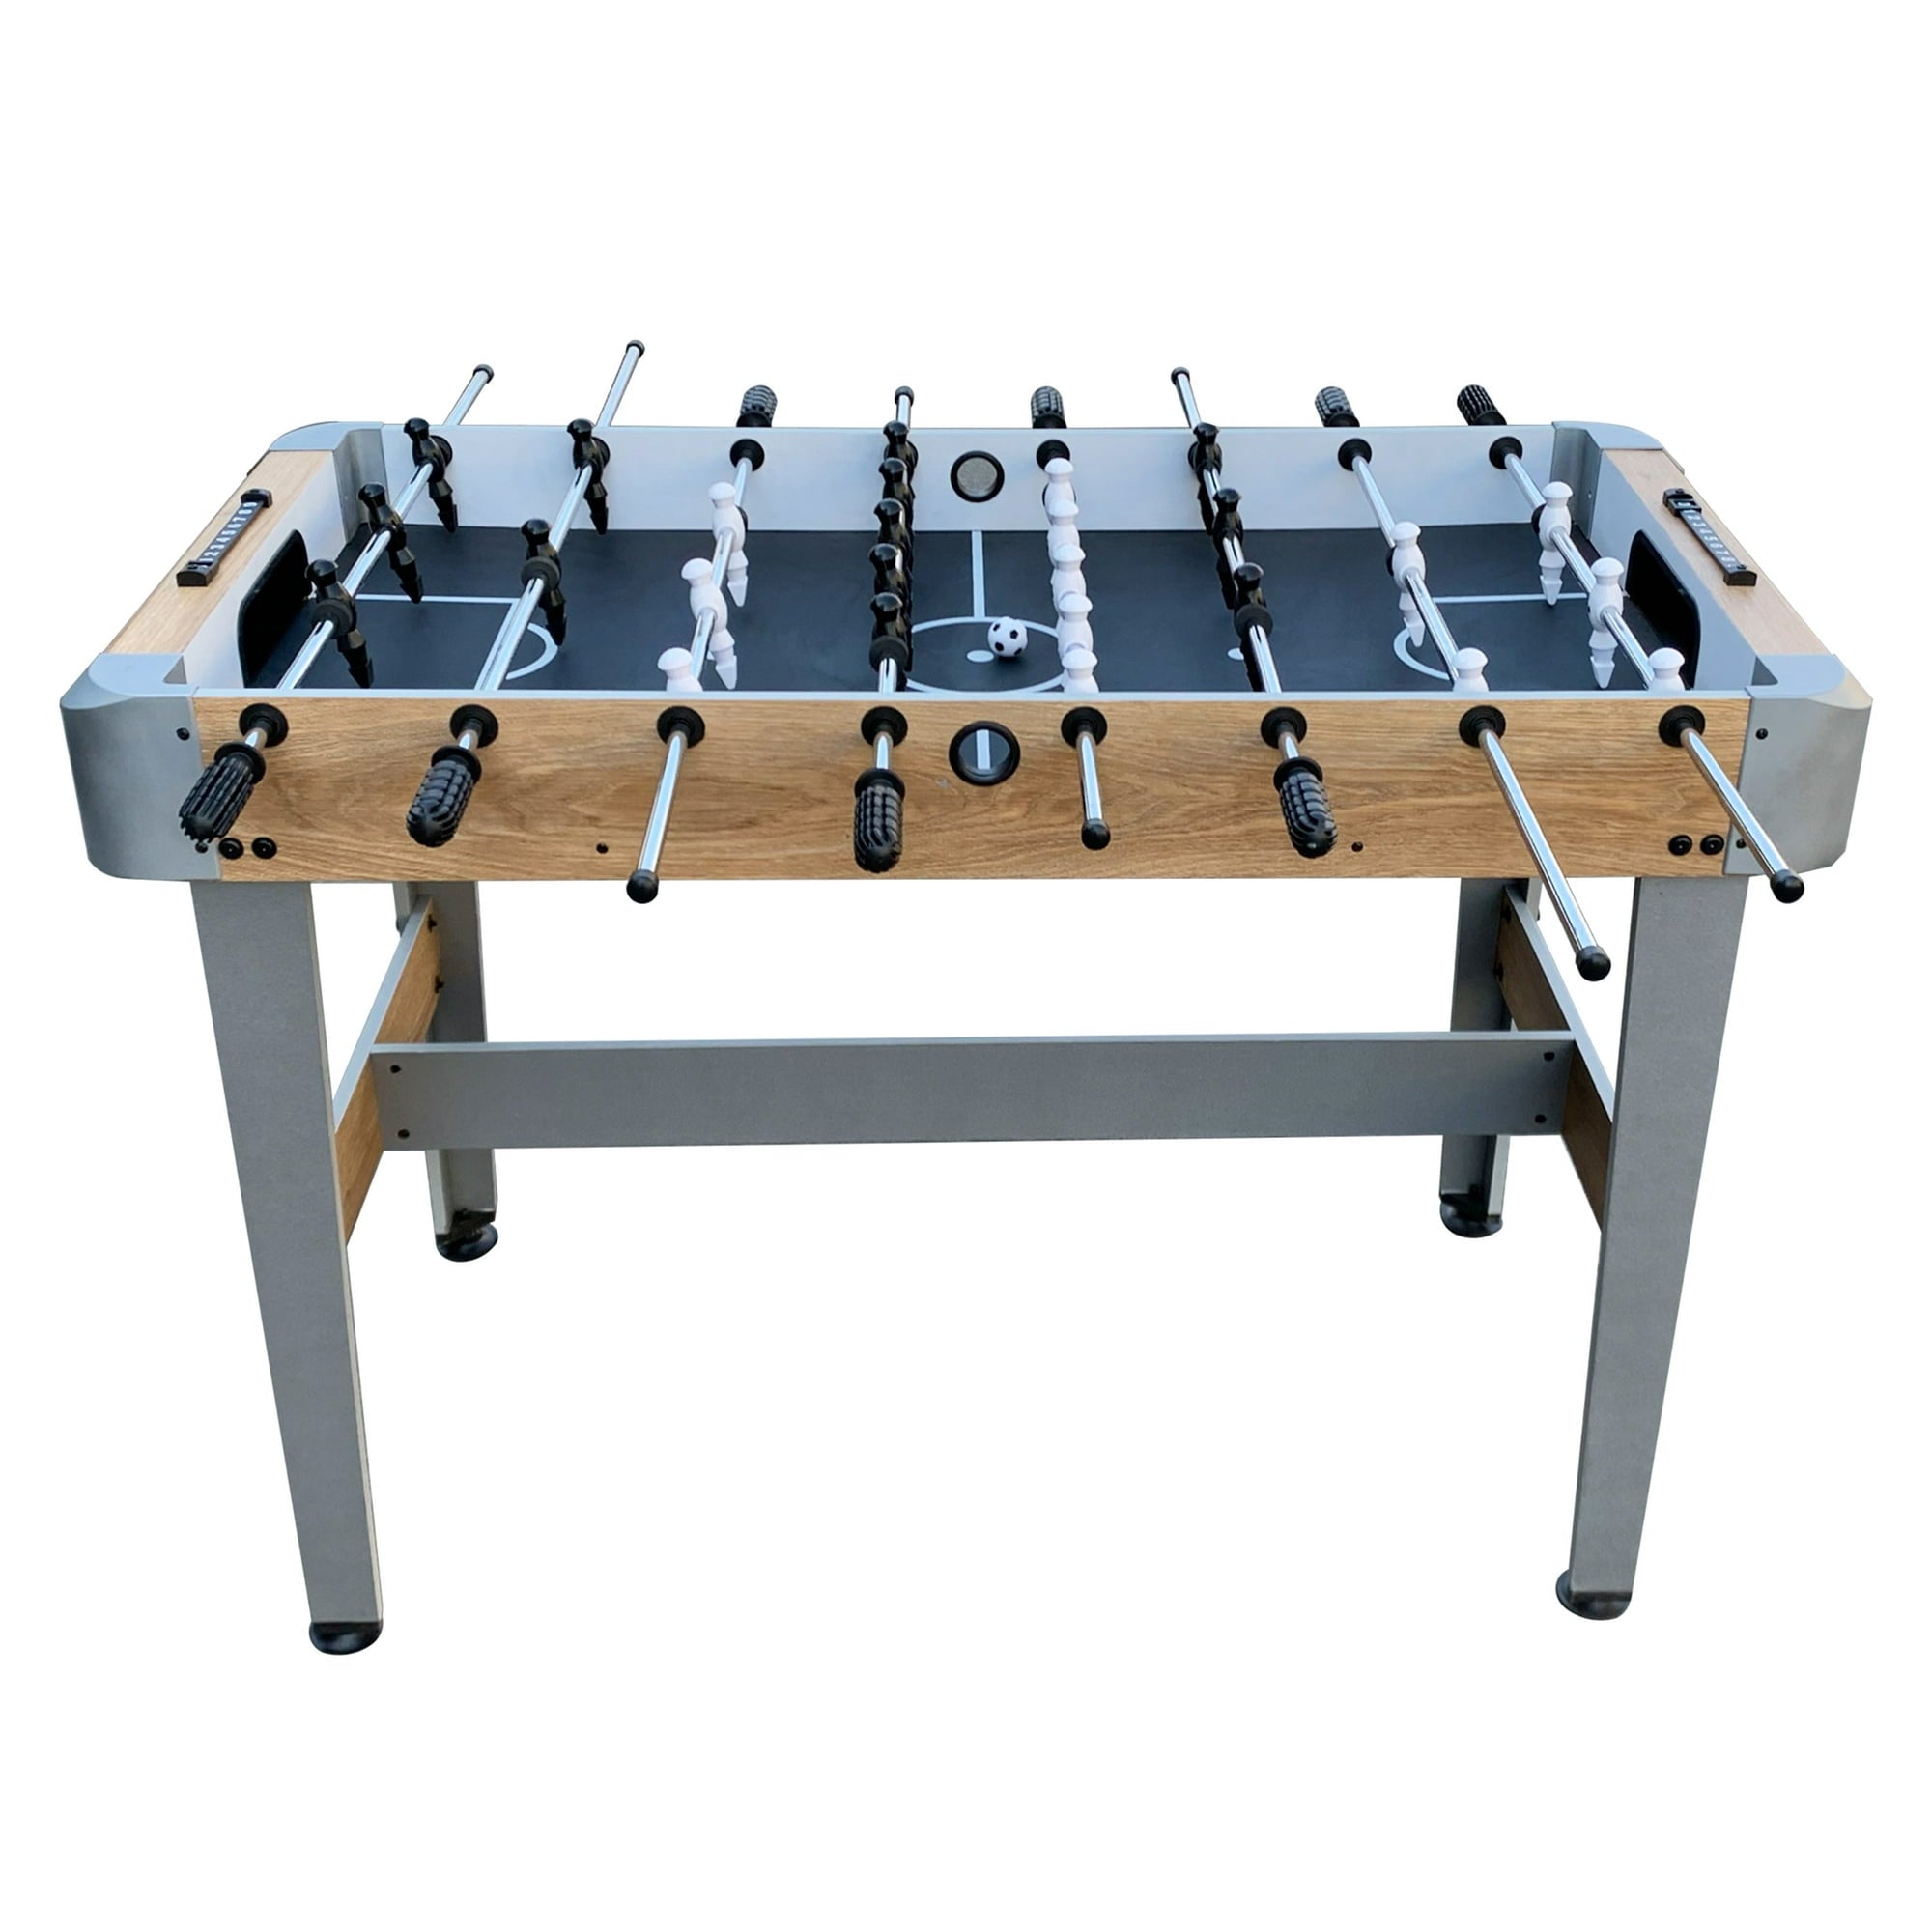 AMHERST 48-IN FOOSBALL TABLE